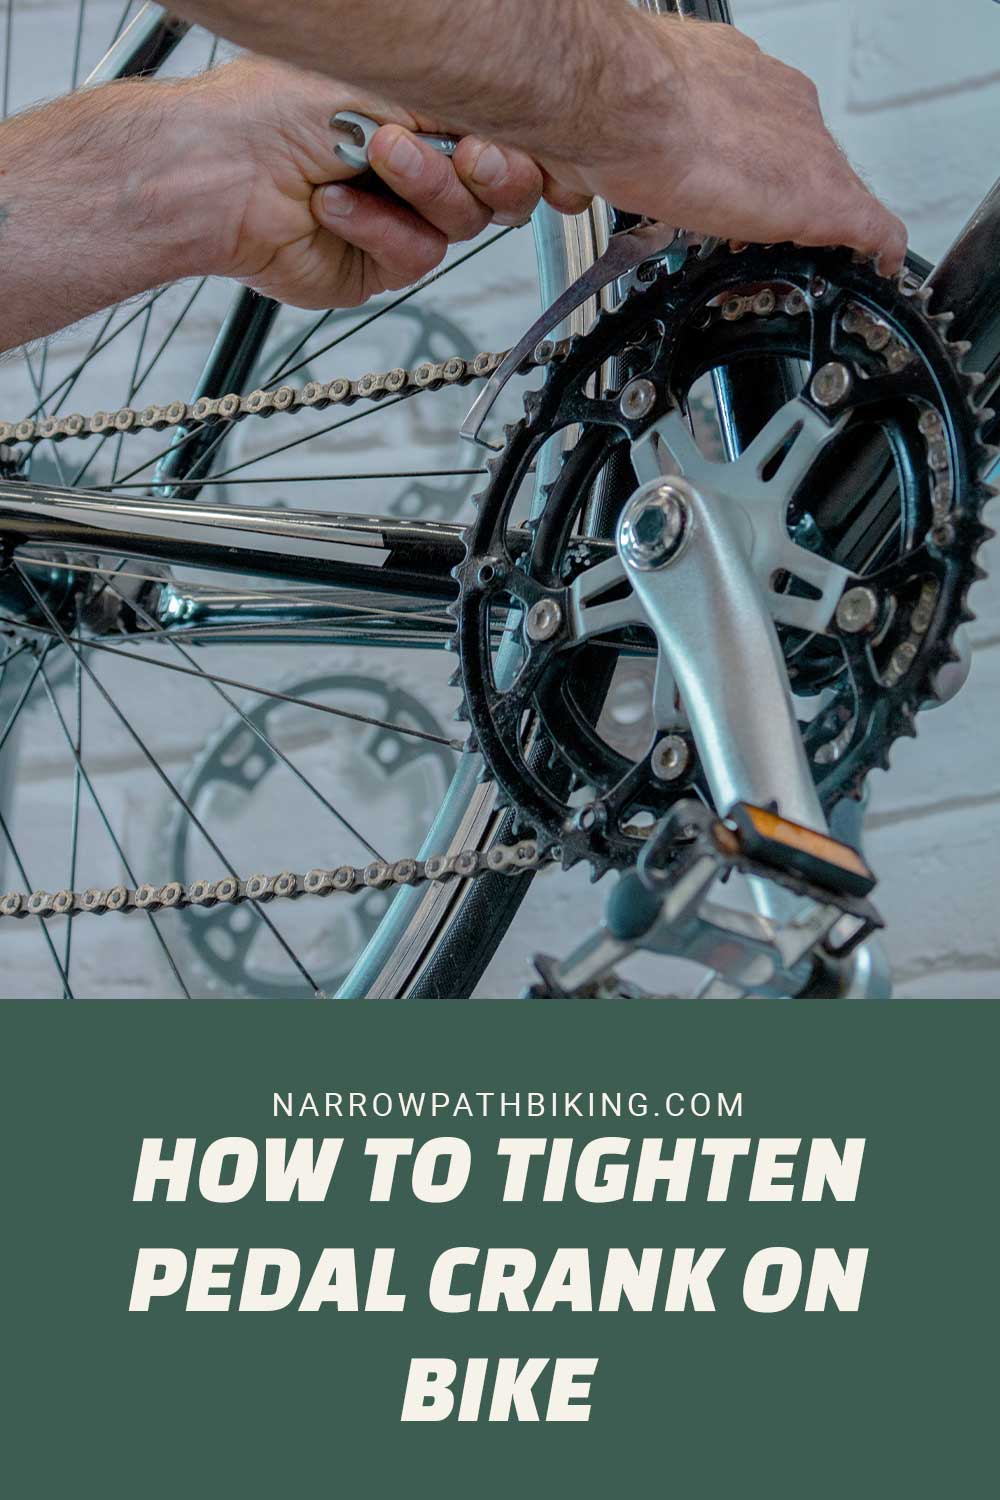 How to Tighten Pedal Crank on Bike